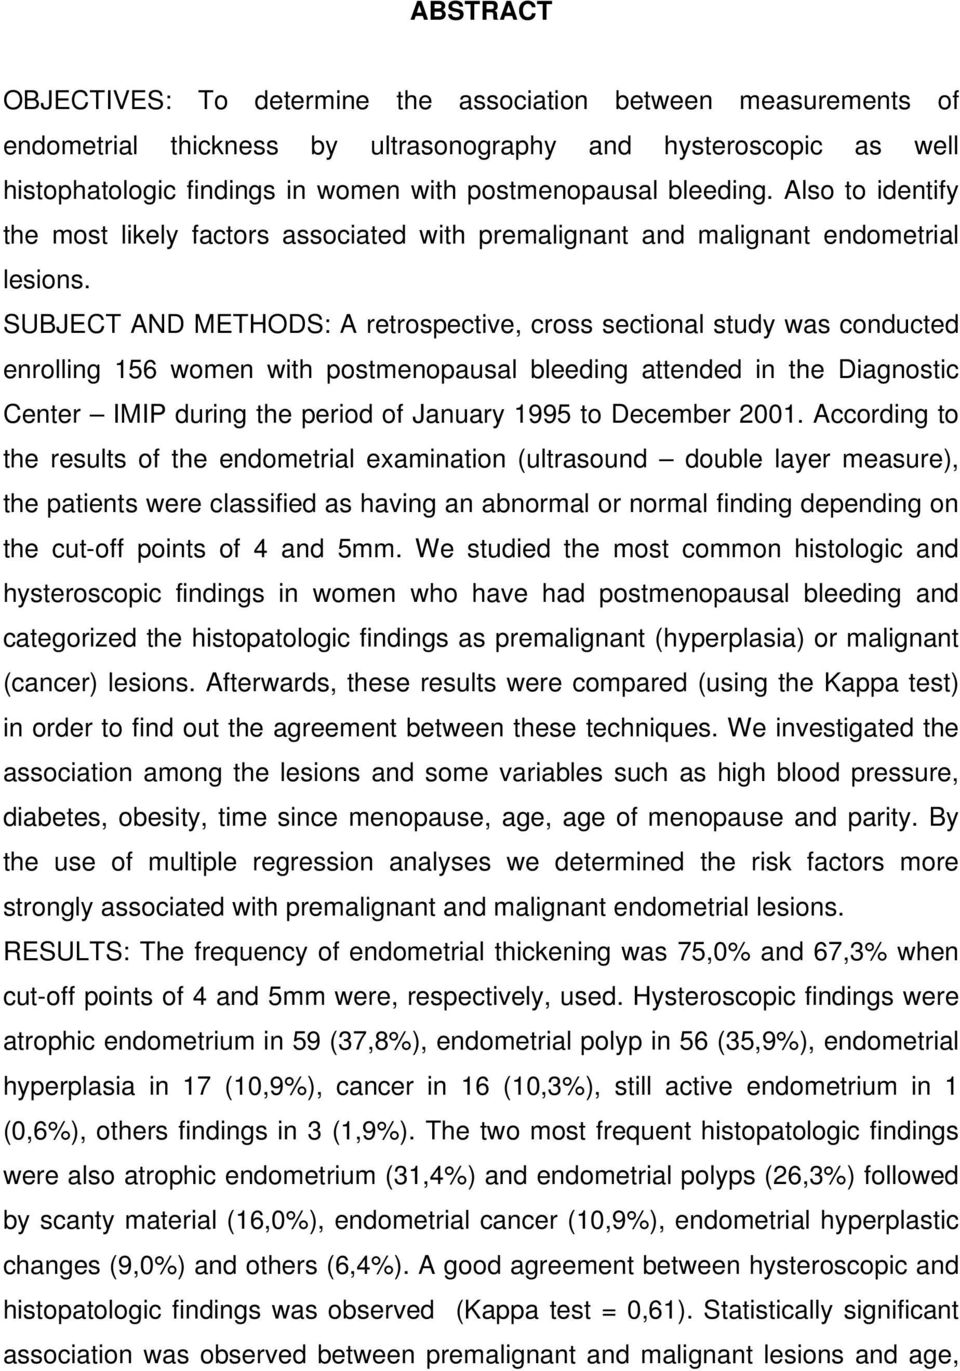 SUBJECT AND METHODS: A retrospective, cross sectional study was conducted enrolling 156 women with postmenopausal bleeding attended in the Diagnostic Center IMIP during the period of January 1995 to